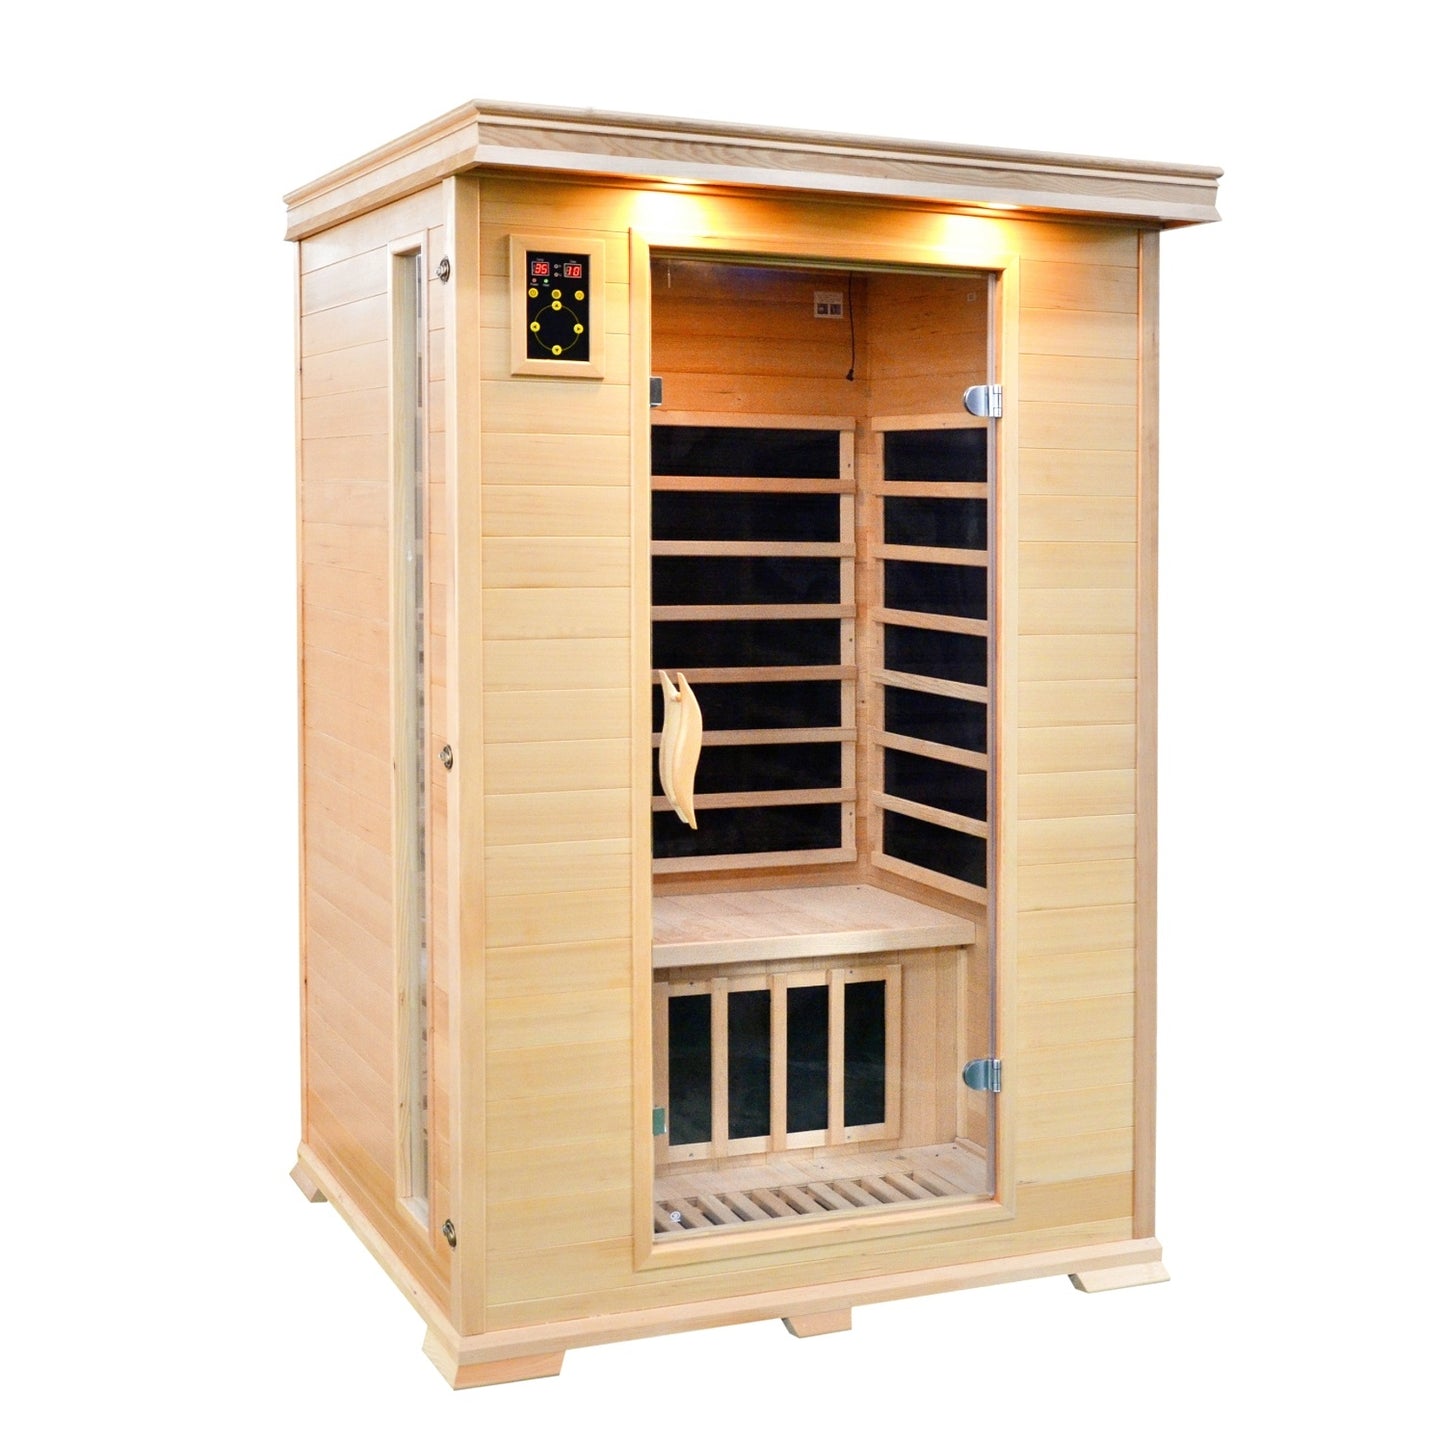 Pre-order Luxury Carbon Fibre Infrared 2 Person Sauna 8 Heating Panels 1920W